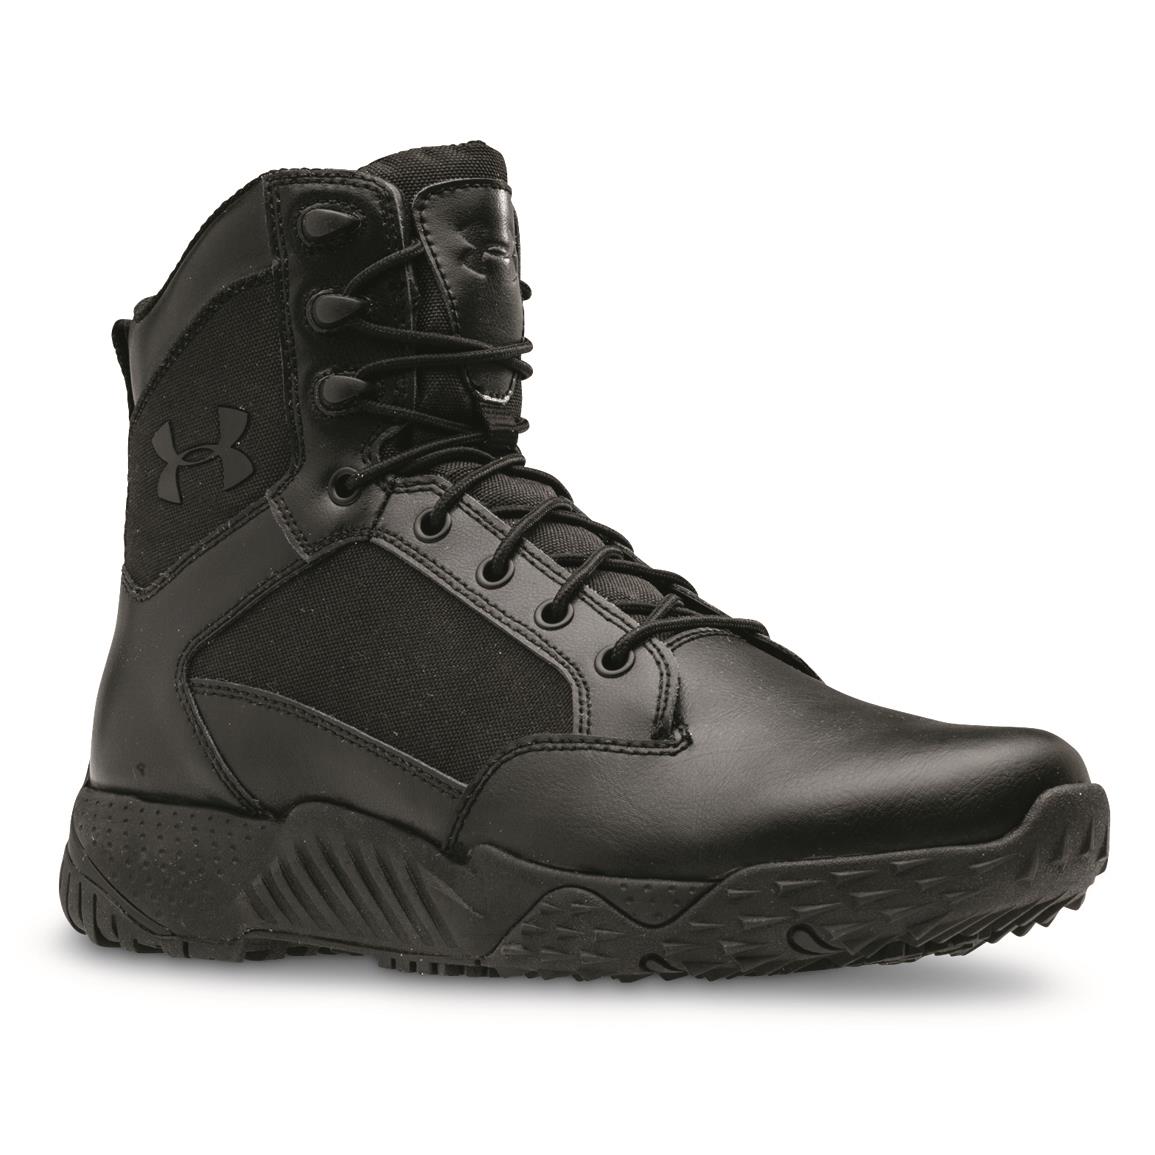 under armour tactical boots steel toe